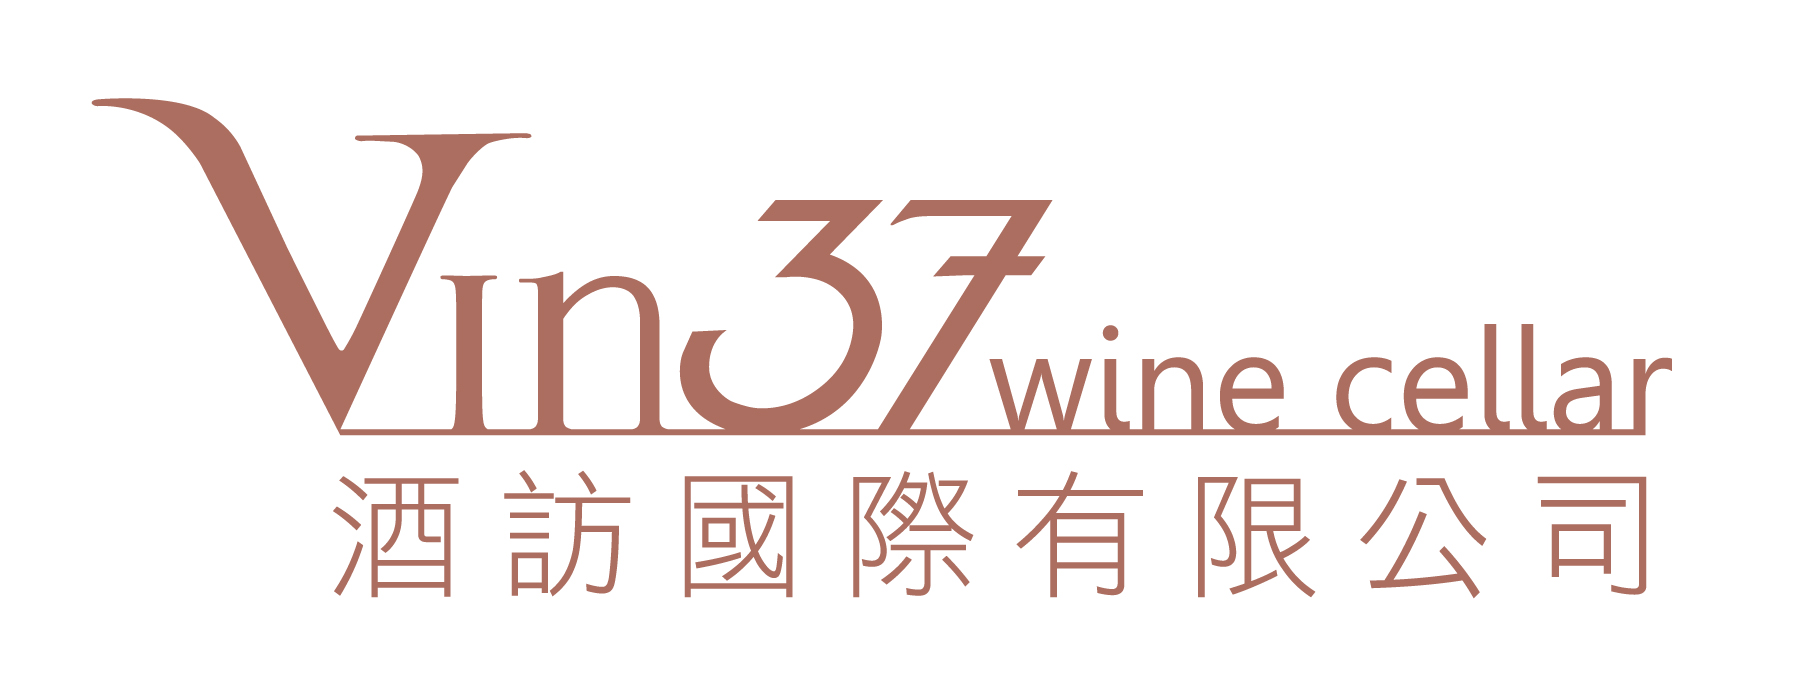 You are currently viewing Vin37 Cellar Co. Ltd